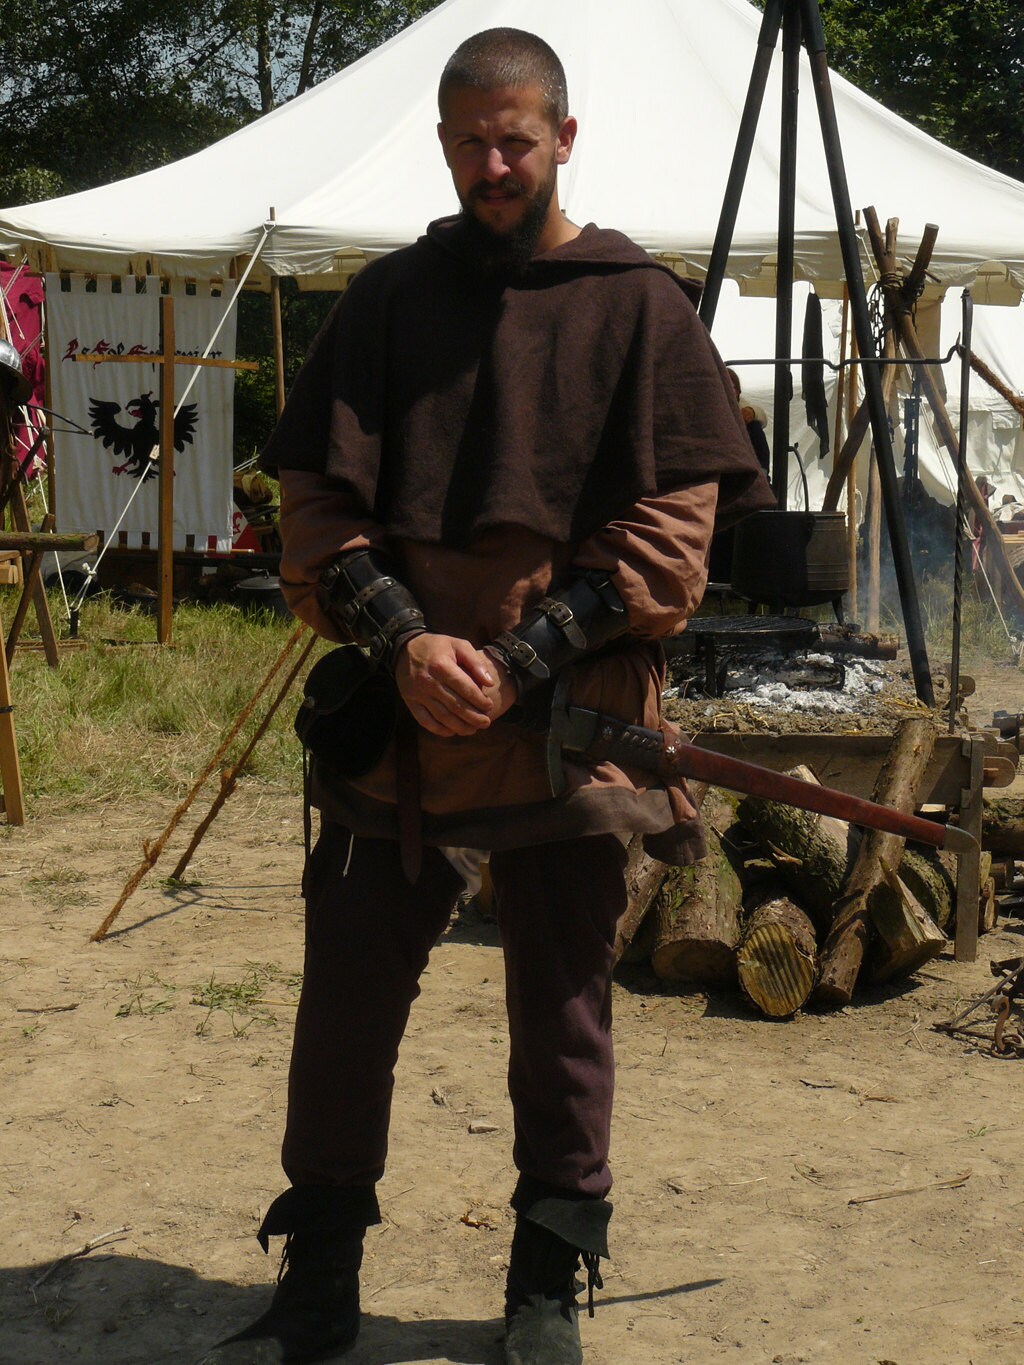 Full medieval costume for men consists of 7 parts